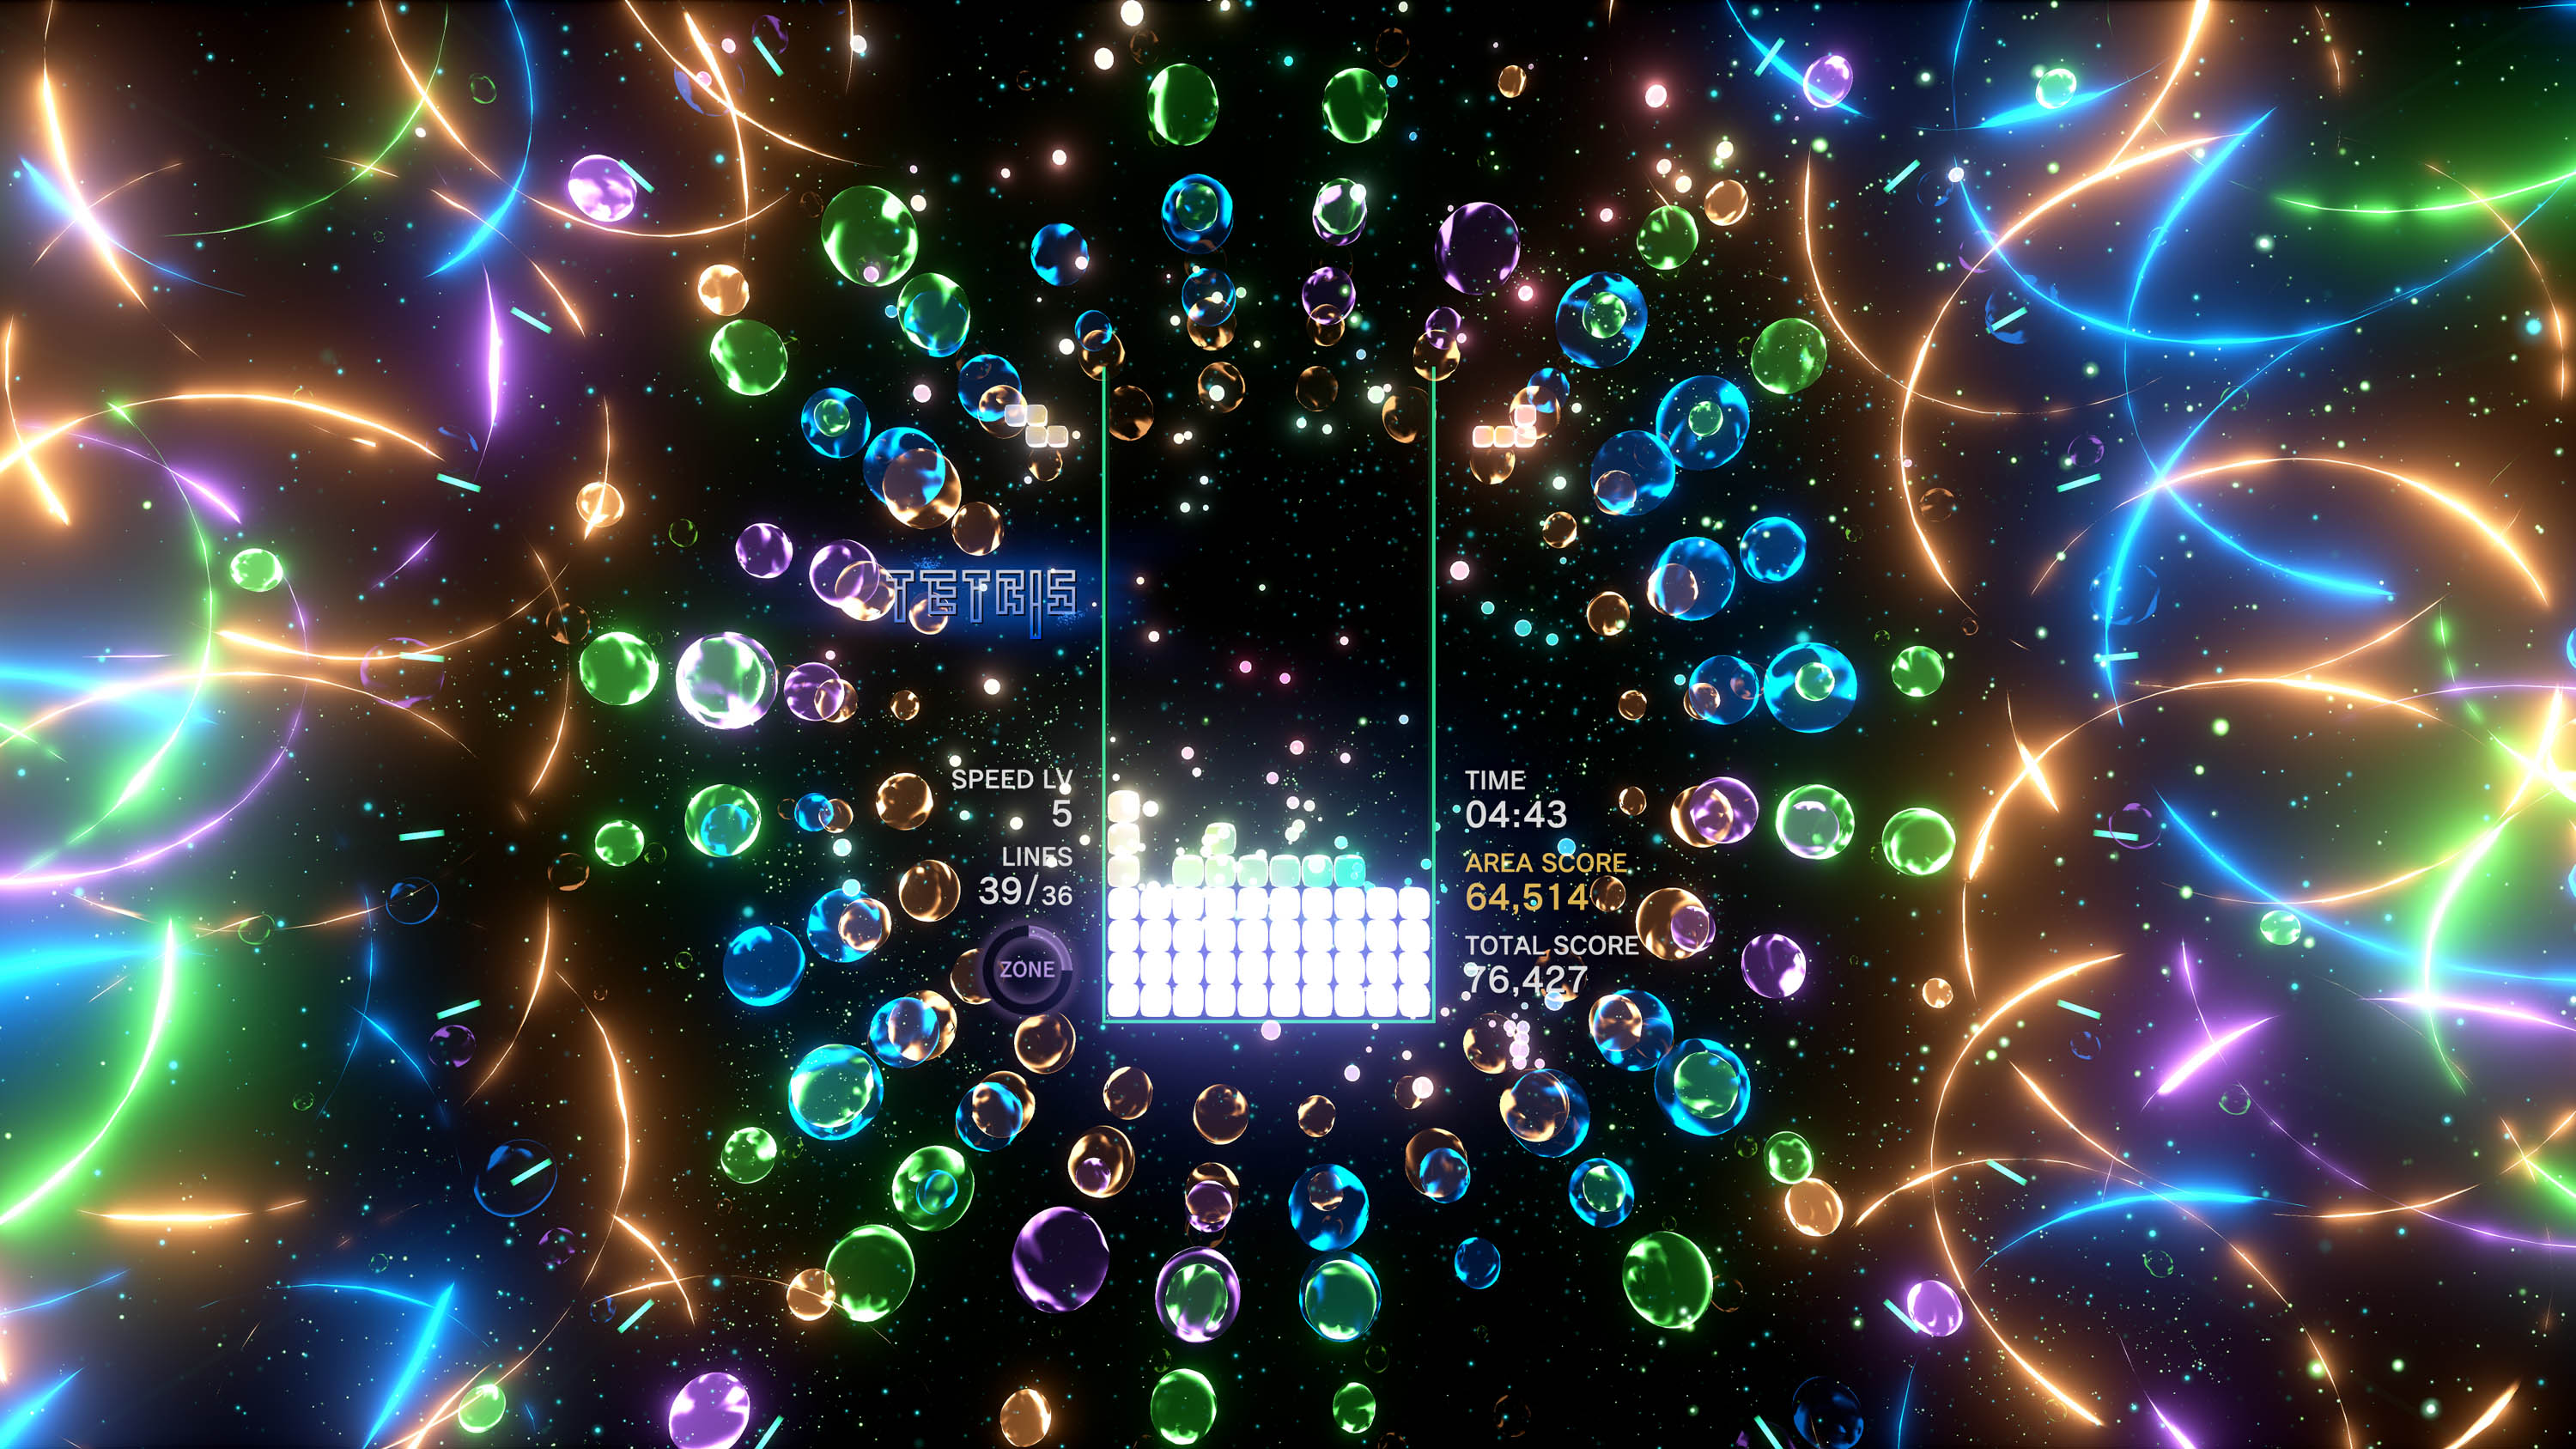 Tetris Effect gameplay showing neon-co,ors flying around a tetris board